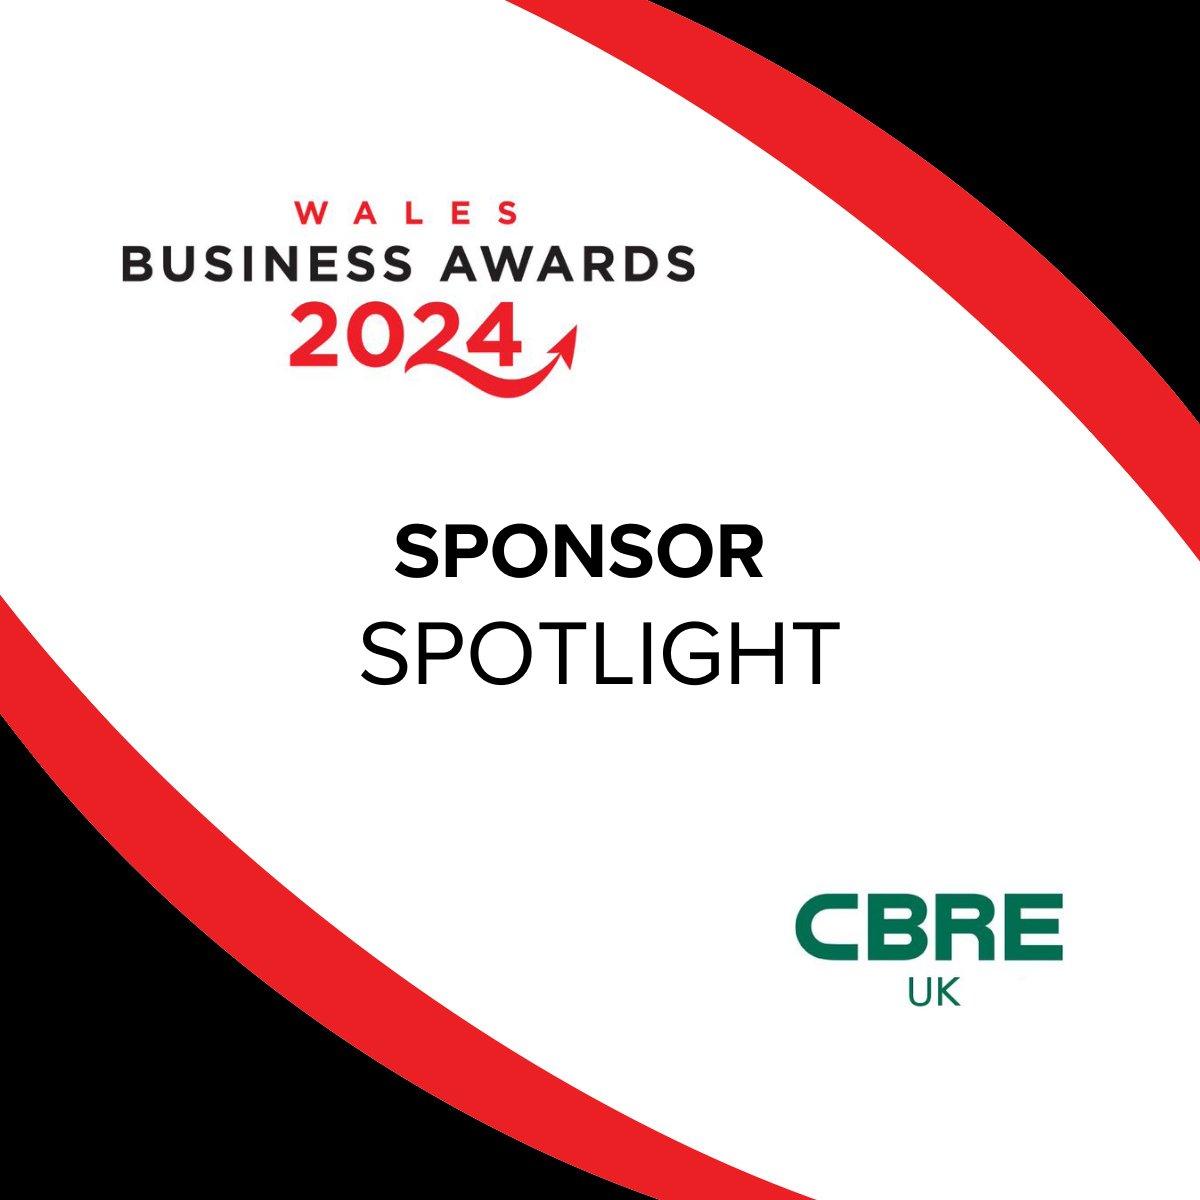 Our Green Business of the Year award shines a light on businesses who are at the forefront of sustainability. @CBRE_uk is sponsoring this award. CBRE provides global commercial real estate services using data and insights that span across the industry: cw-seswm.com/news/introduci…